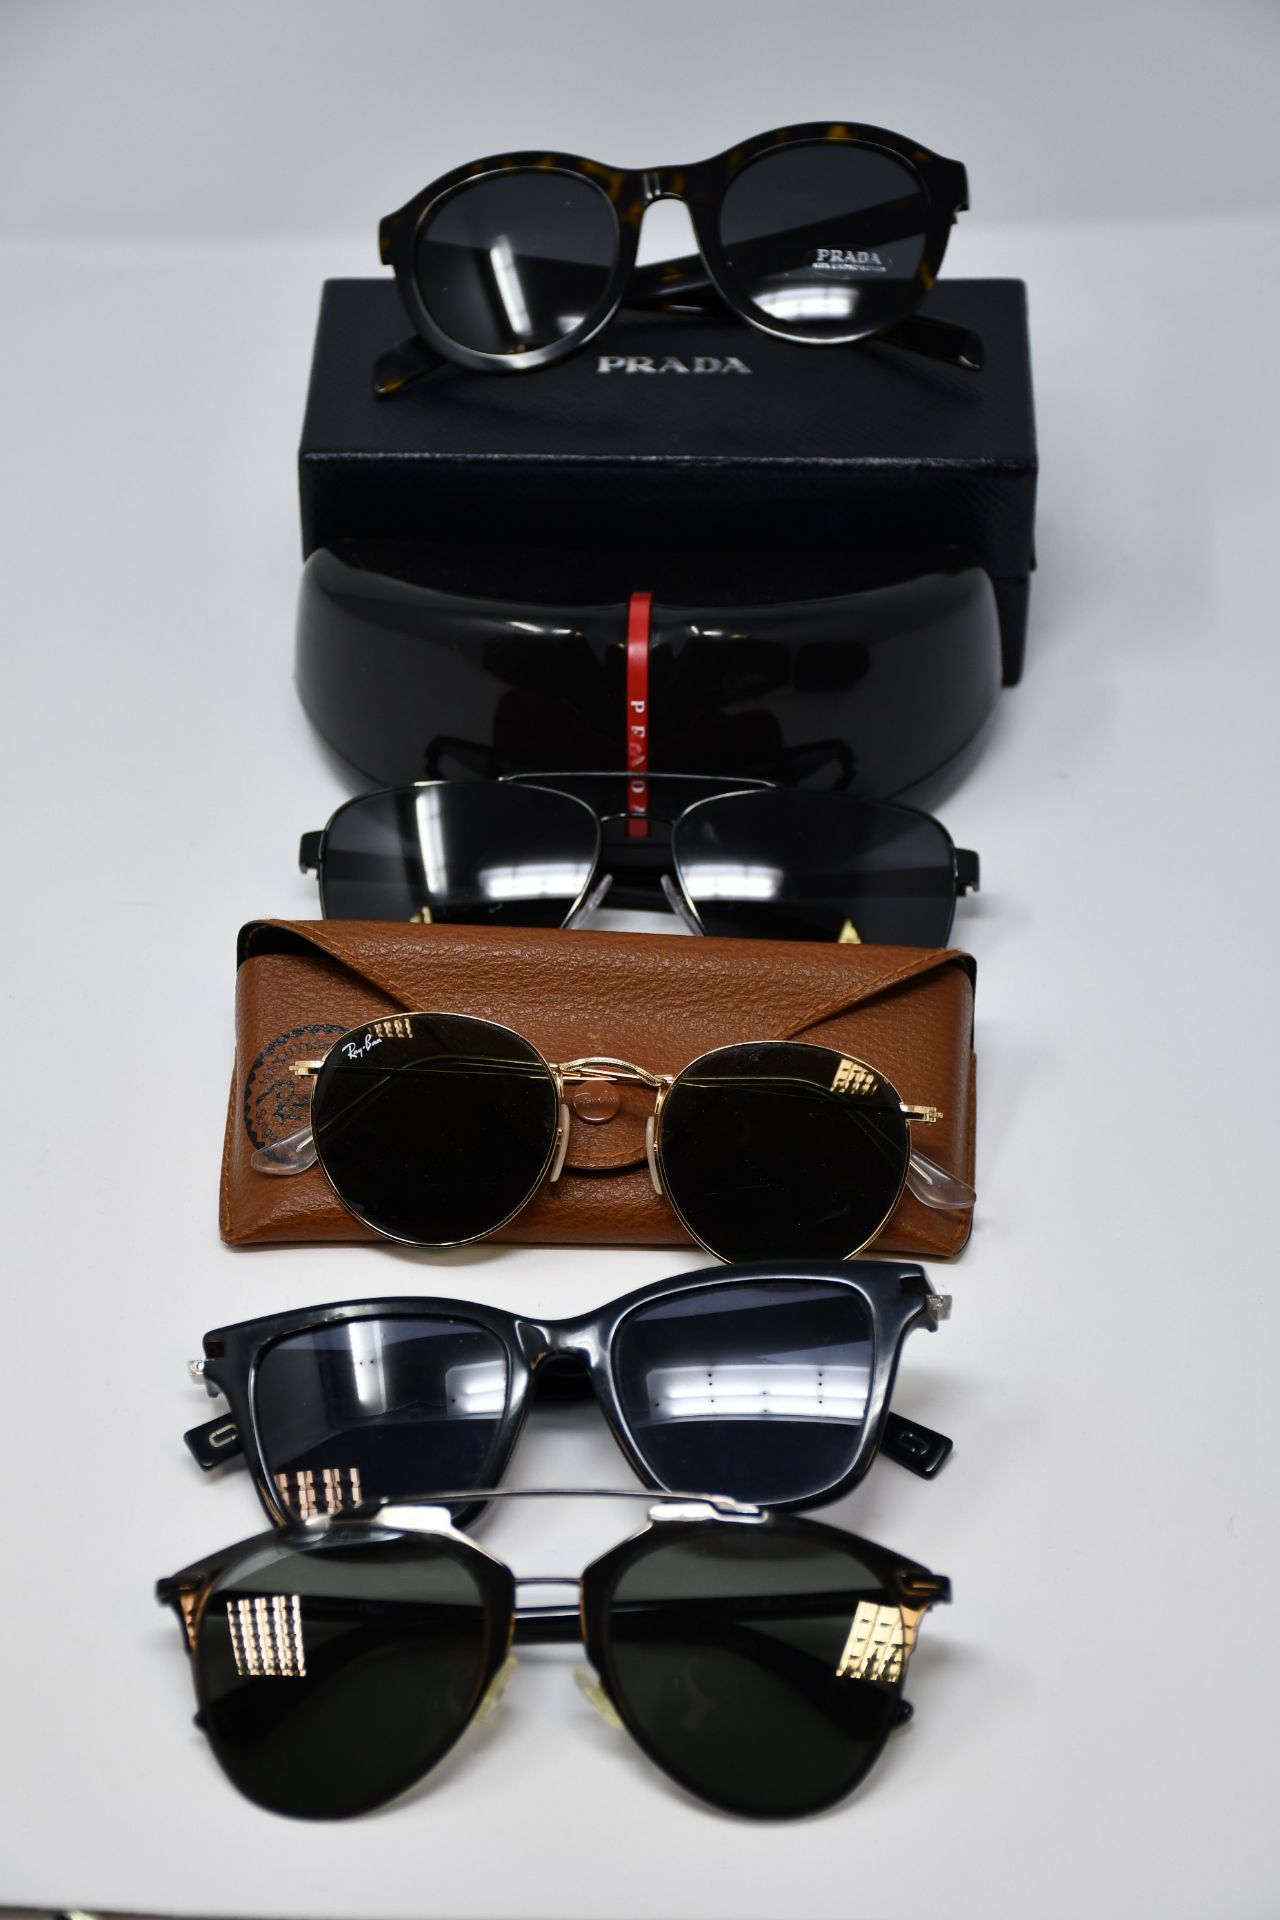 Five pairs of pre-owned branded sunglasses.